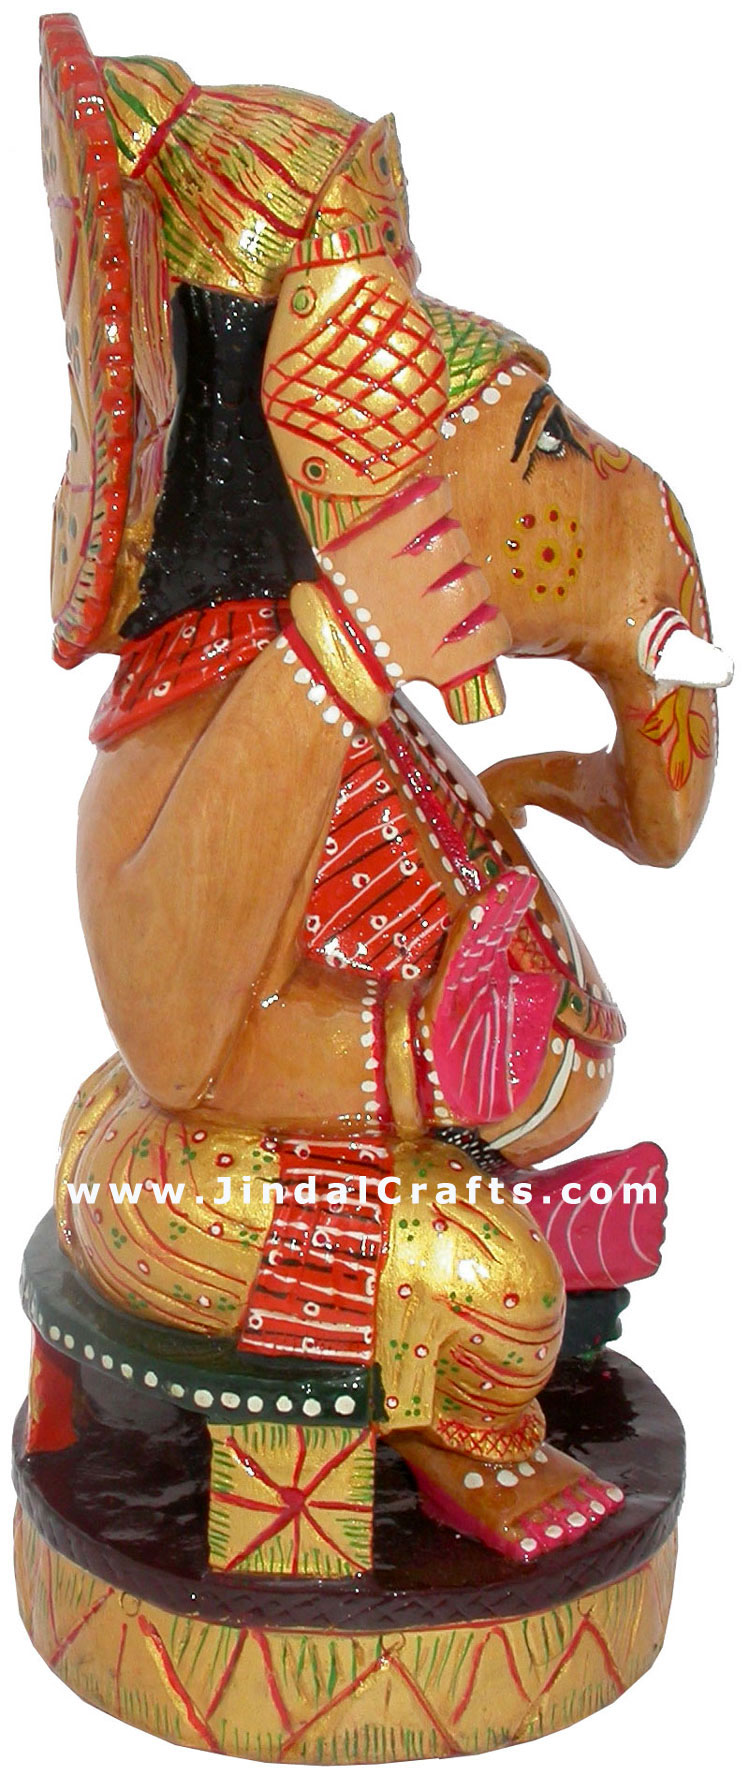 Hand Crafted Hand Painted Lord Ganesha Wooden Statue Indian God Idol Art Figure